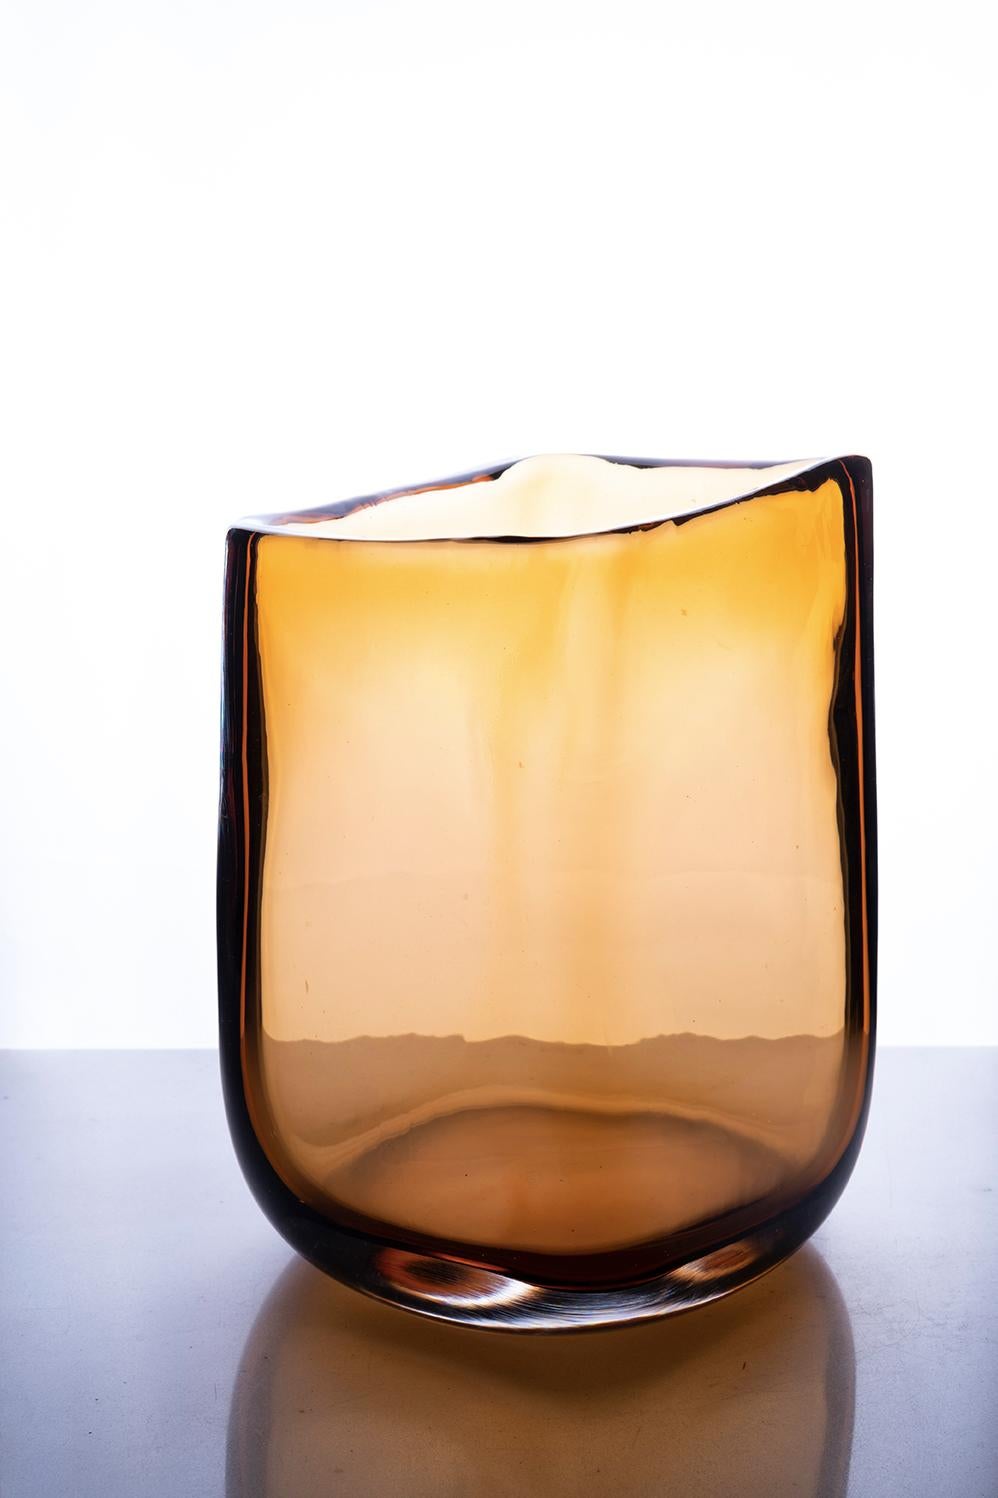 Trapezio small vase, Murano glass, by Federico Peri, 21st century.
Trapezio is a vase from the Essentials collection designed by Federico Peri for Purho in spring 2021.
Created from the starting-point of an oval and conical hollow glass cylinder,